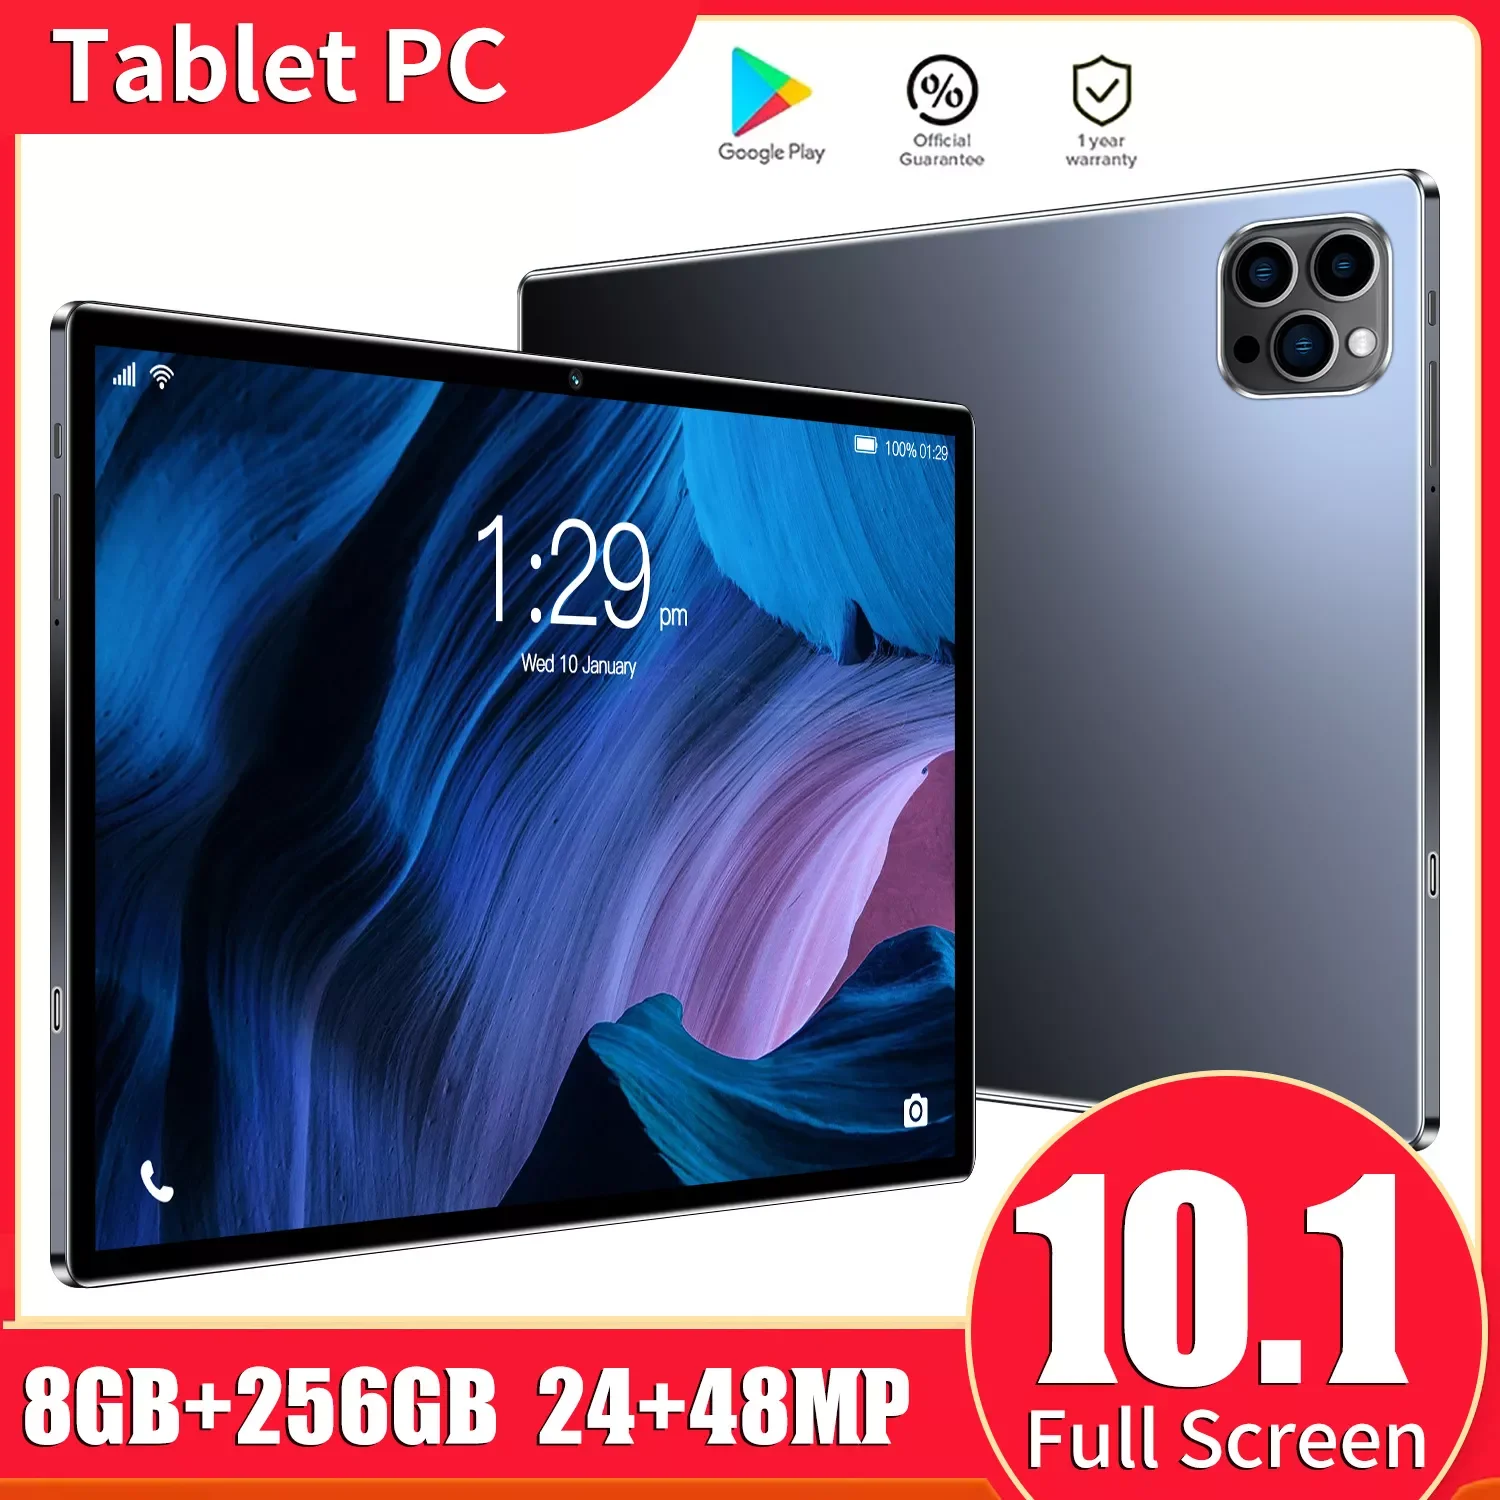 

2022 Pad Max 10.1-inch Fullview Display Snapdragon 680 Octa-core 8GB DDR4 256GB ROM 4G LTE GPS Android 12 Tablet PC